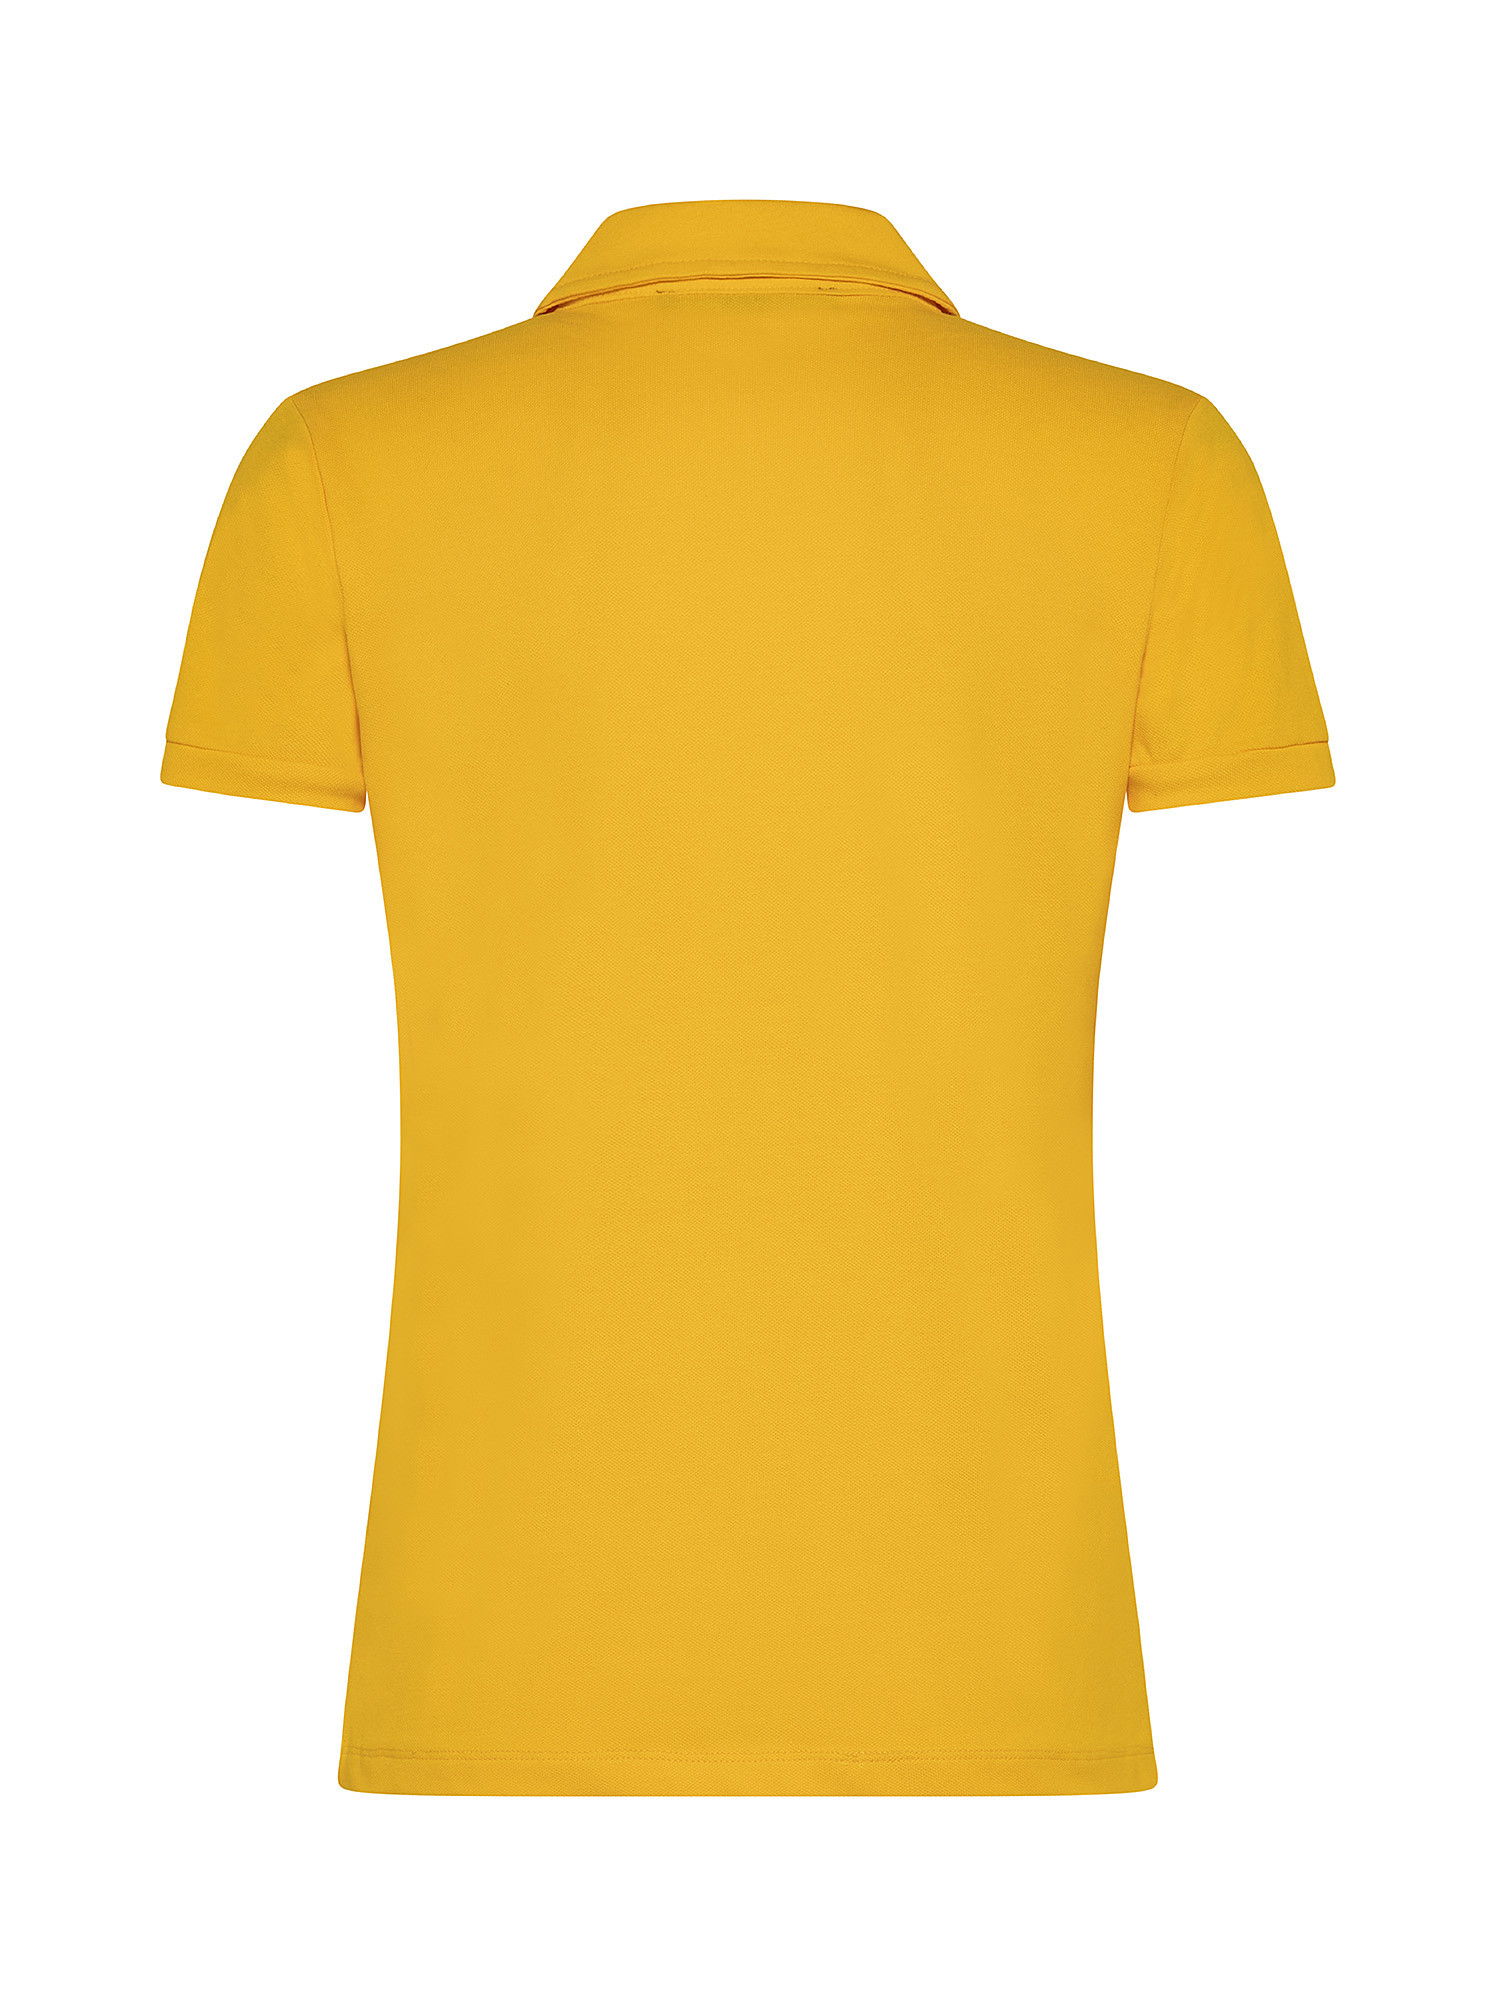 Polo shirt with rouches, Sunflower Yellow, large image number 1